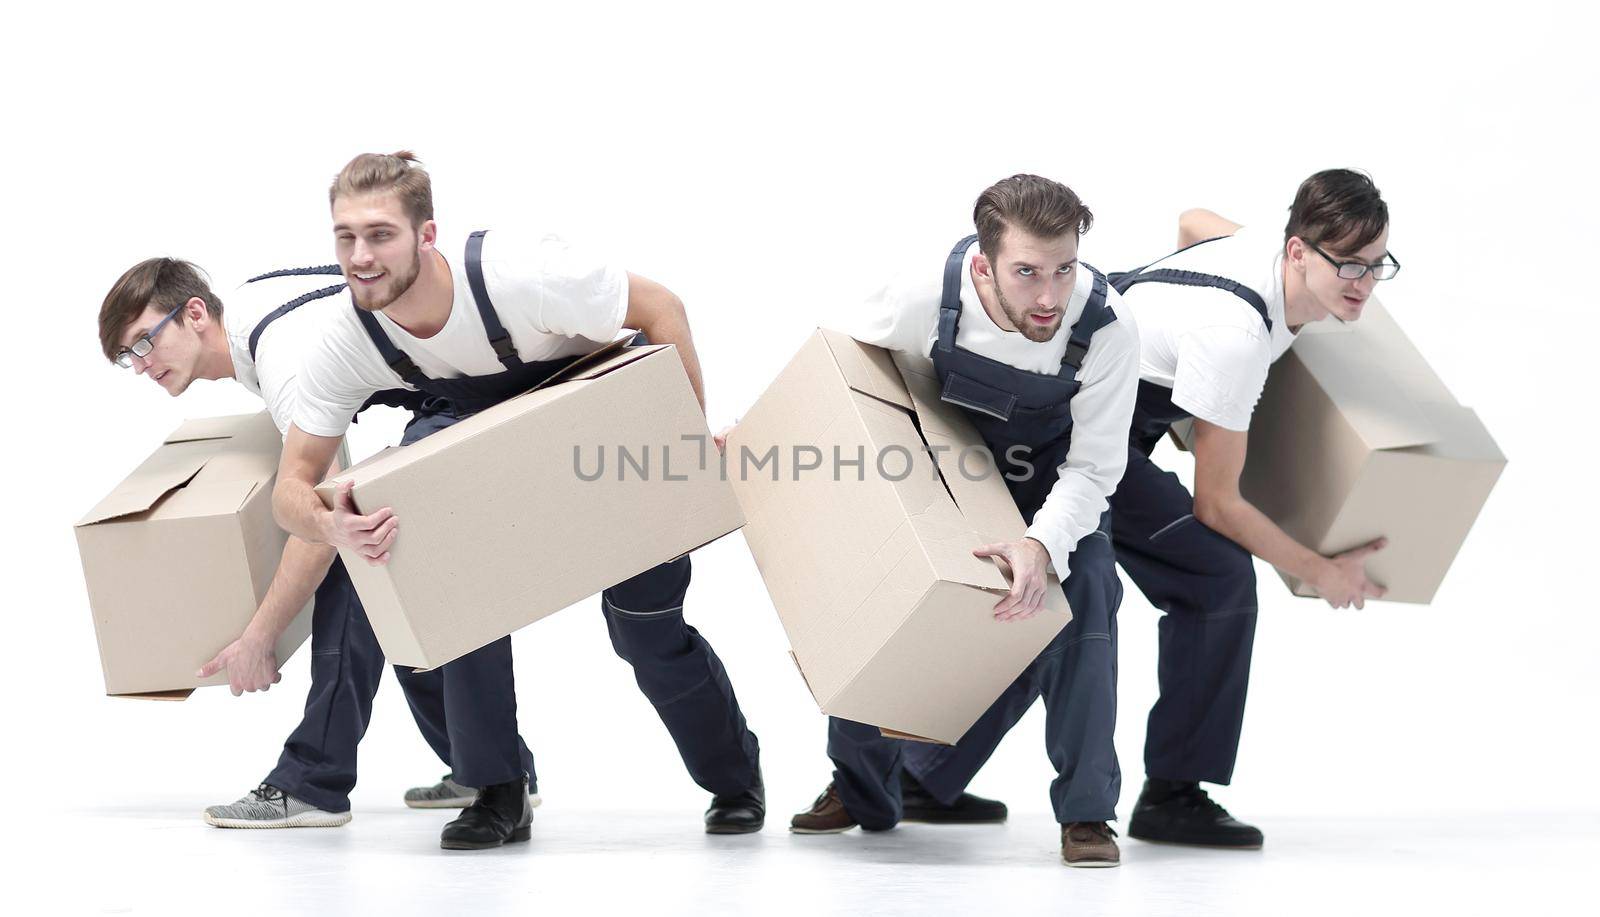 Responsible movers in a hurry to do their job.